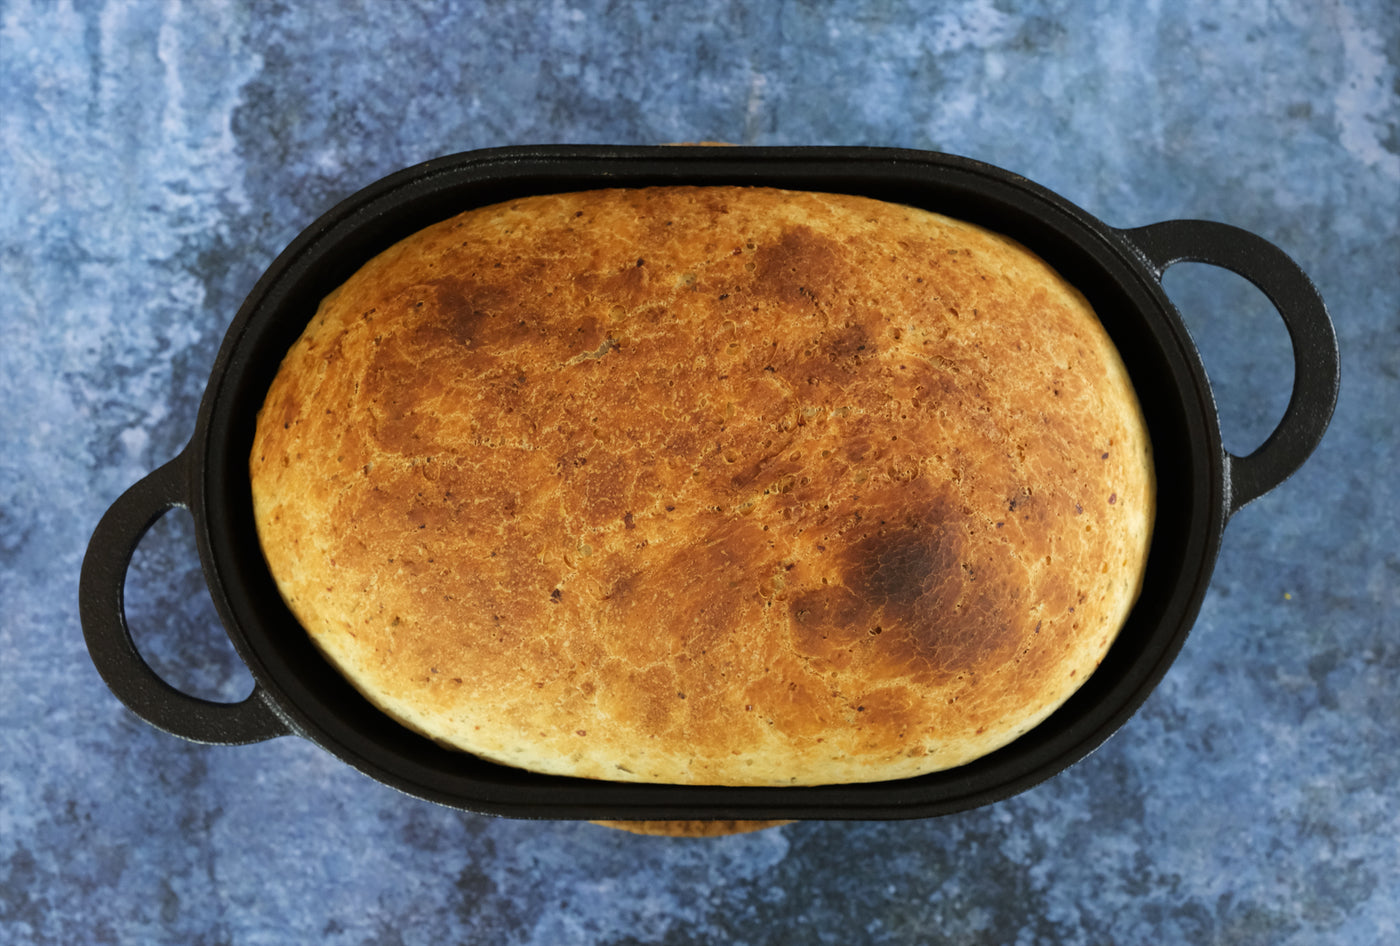 Cast Iron Bread Pan Dutch oven with Lid – Oven Safe Form for Baking, Artisan Bread Kit - Loaf Pan